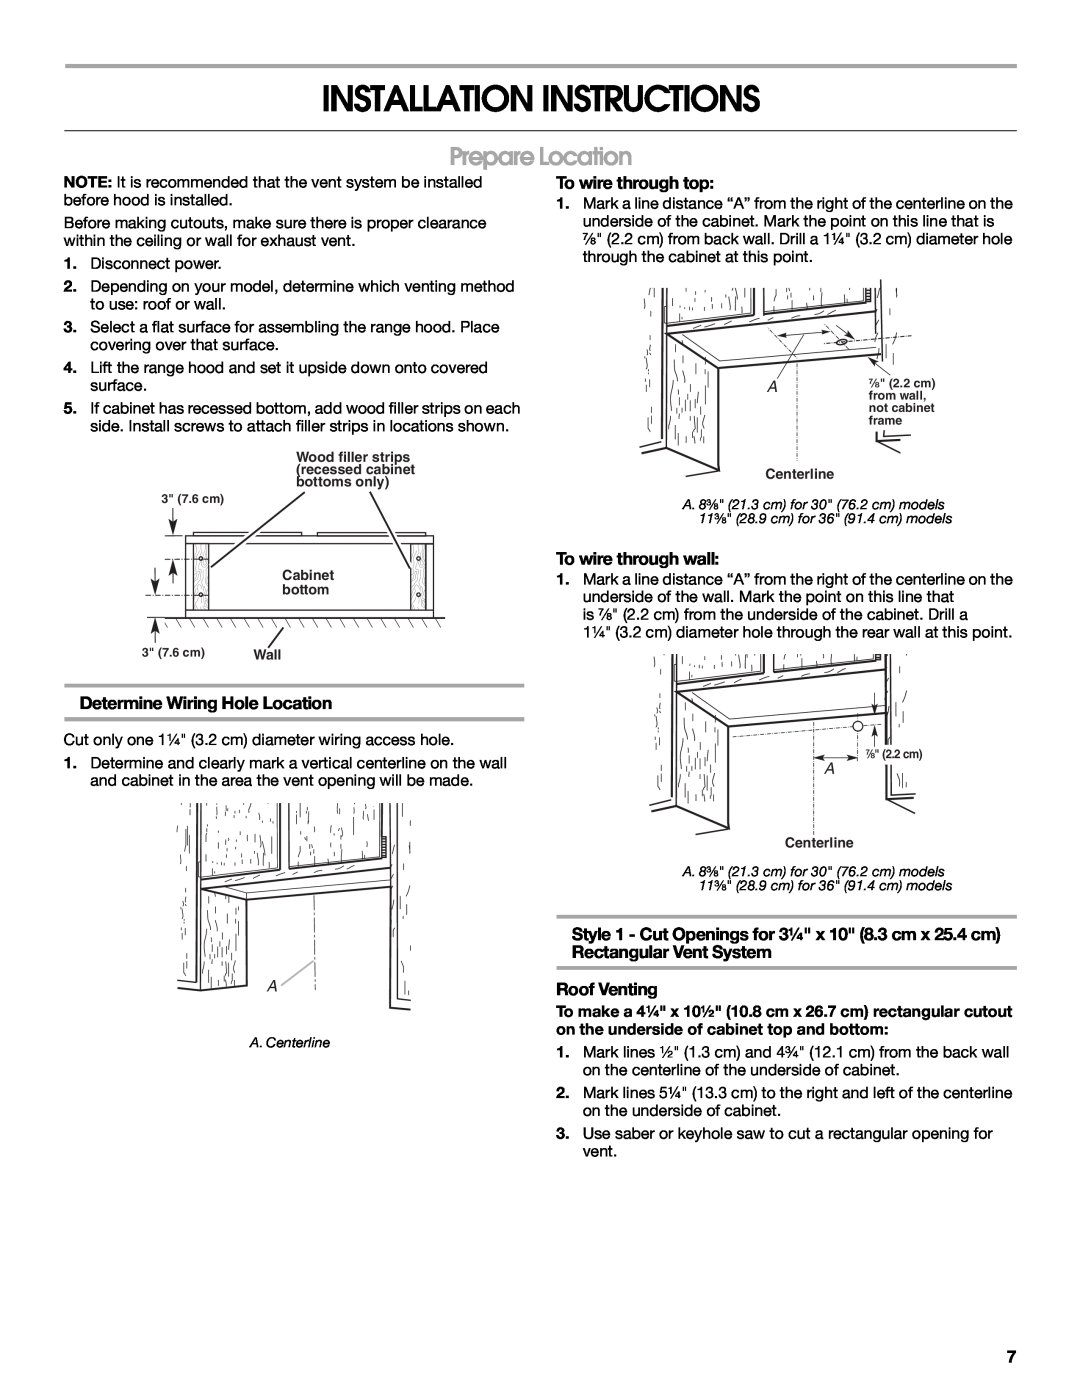 Whirlpool UXT3030AY Installation Instructions, Prepare Location, To wire through top, To wire through wall, Roof Venting 